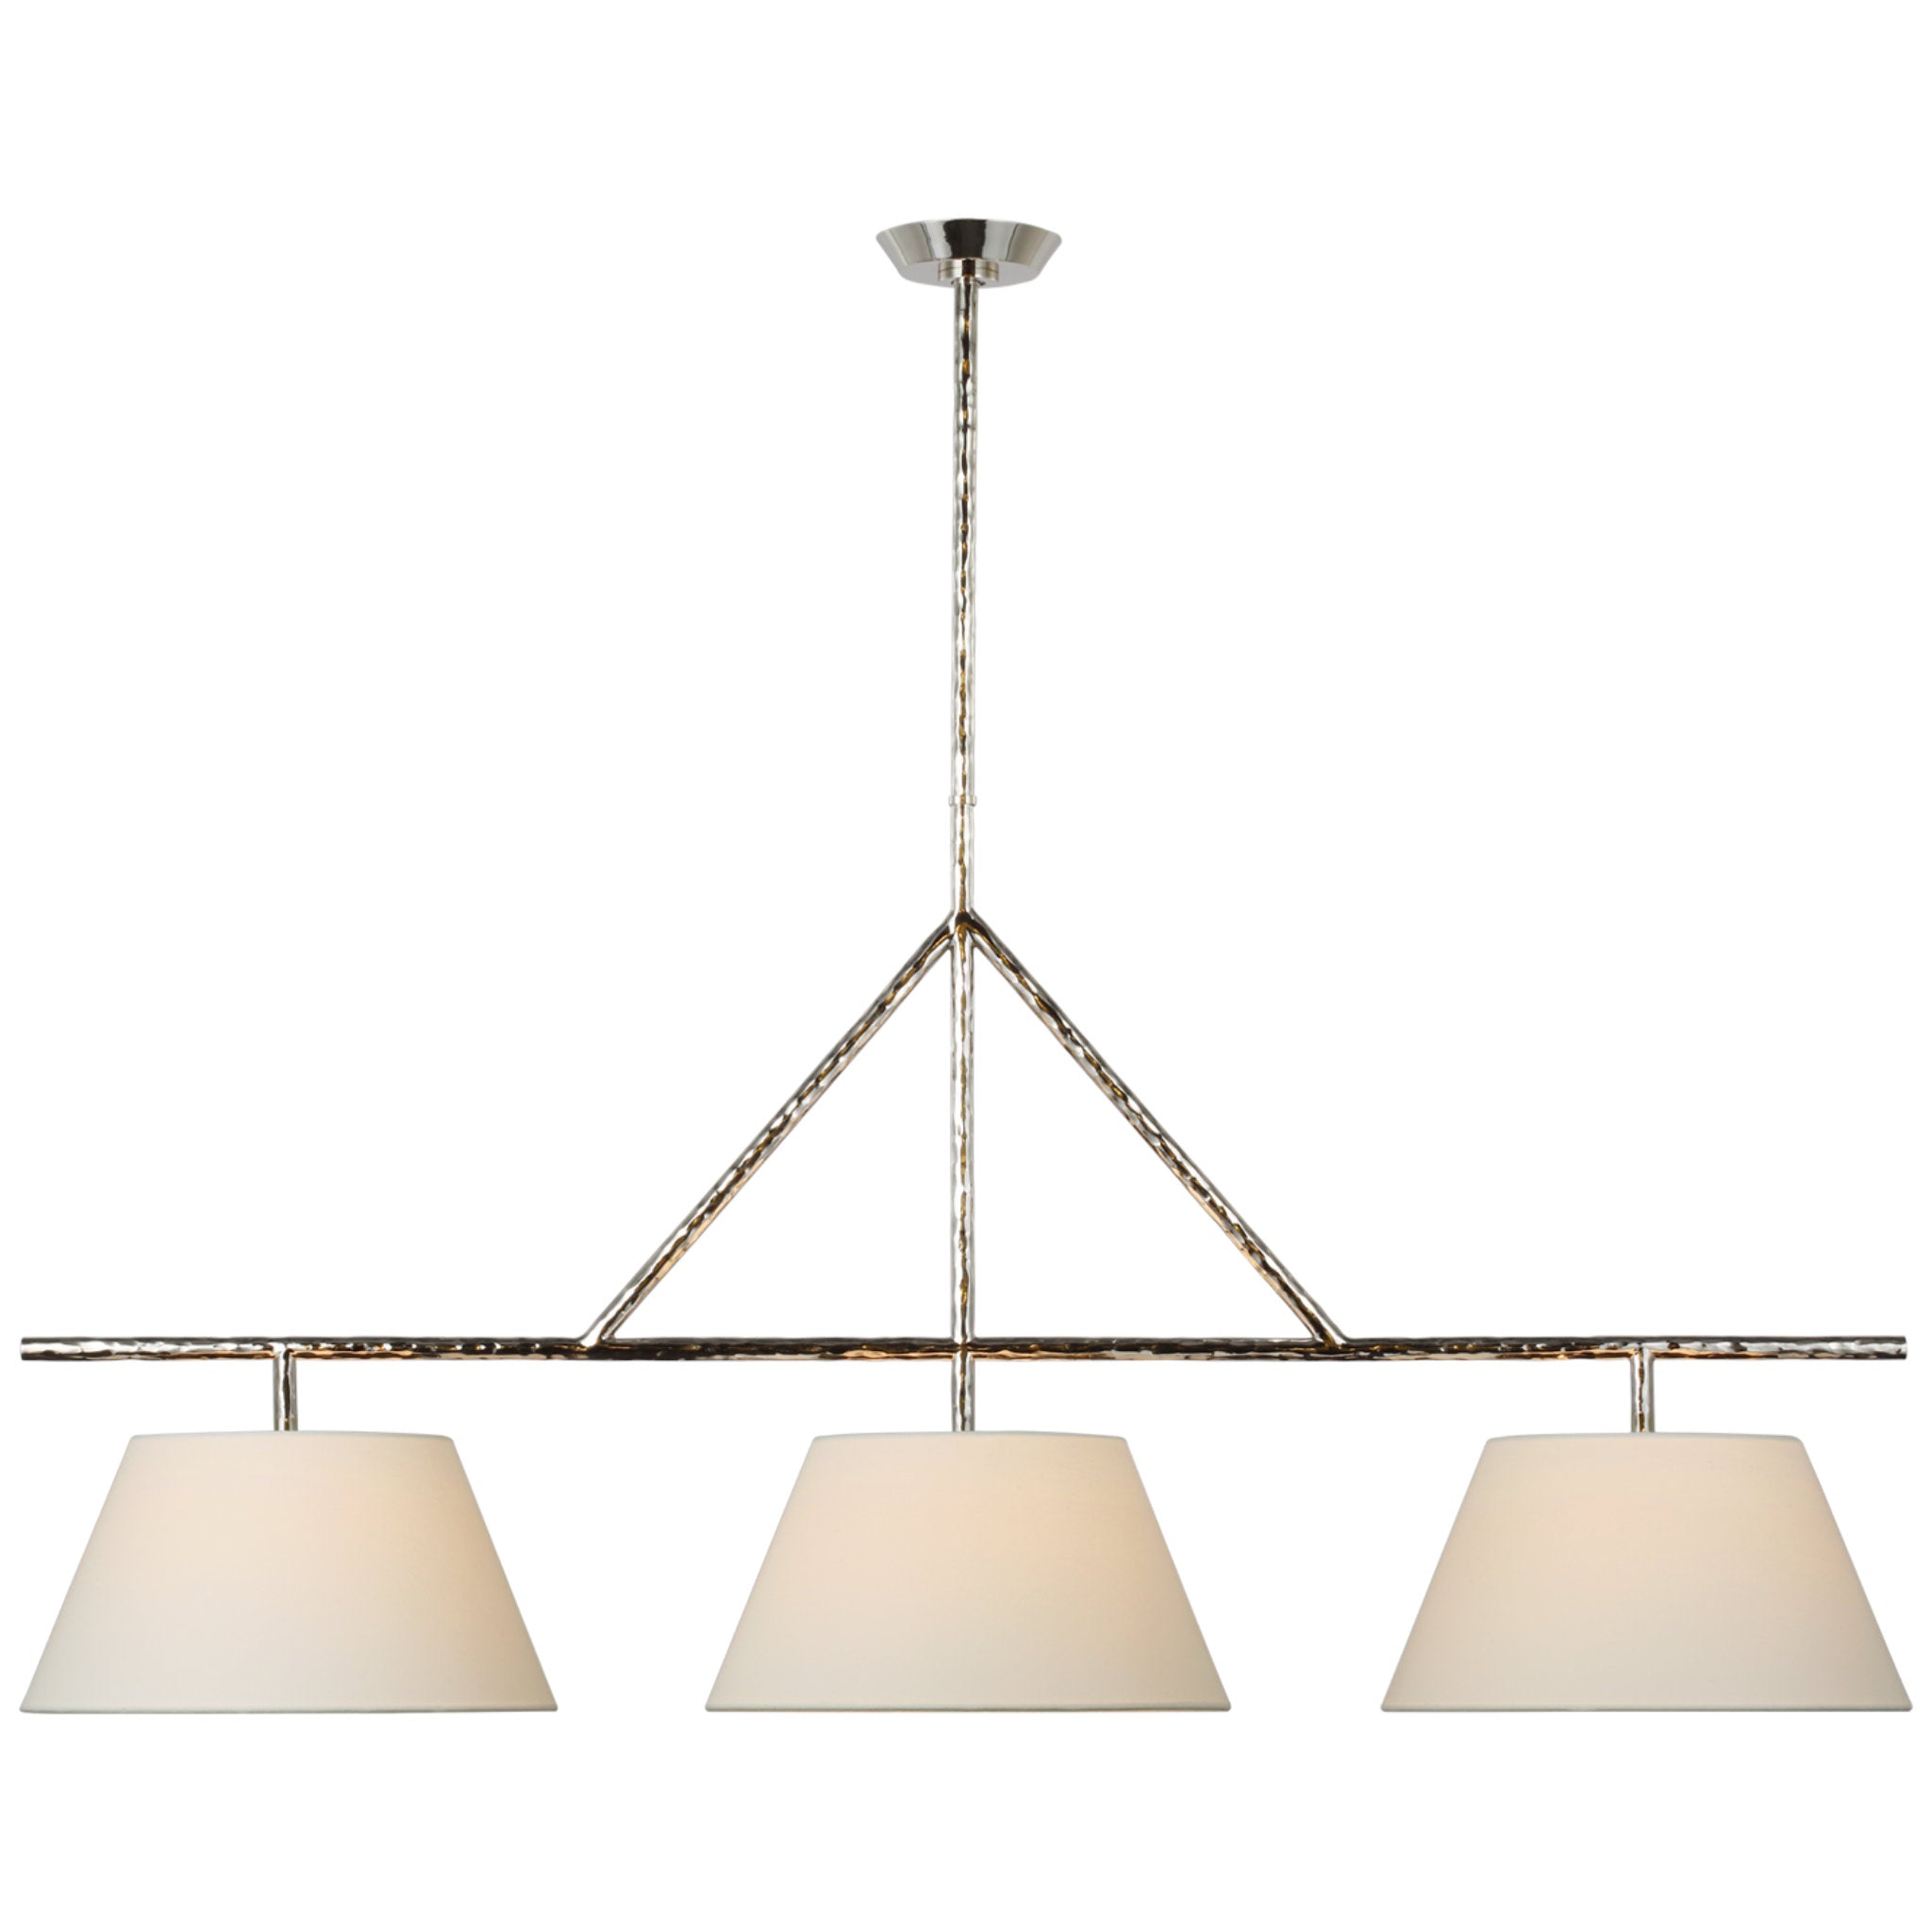 Suzanne Kasler Collette Large Linear Pendant in Polished Nickel with Linen Shade